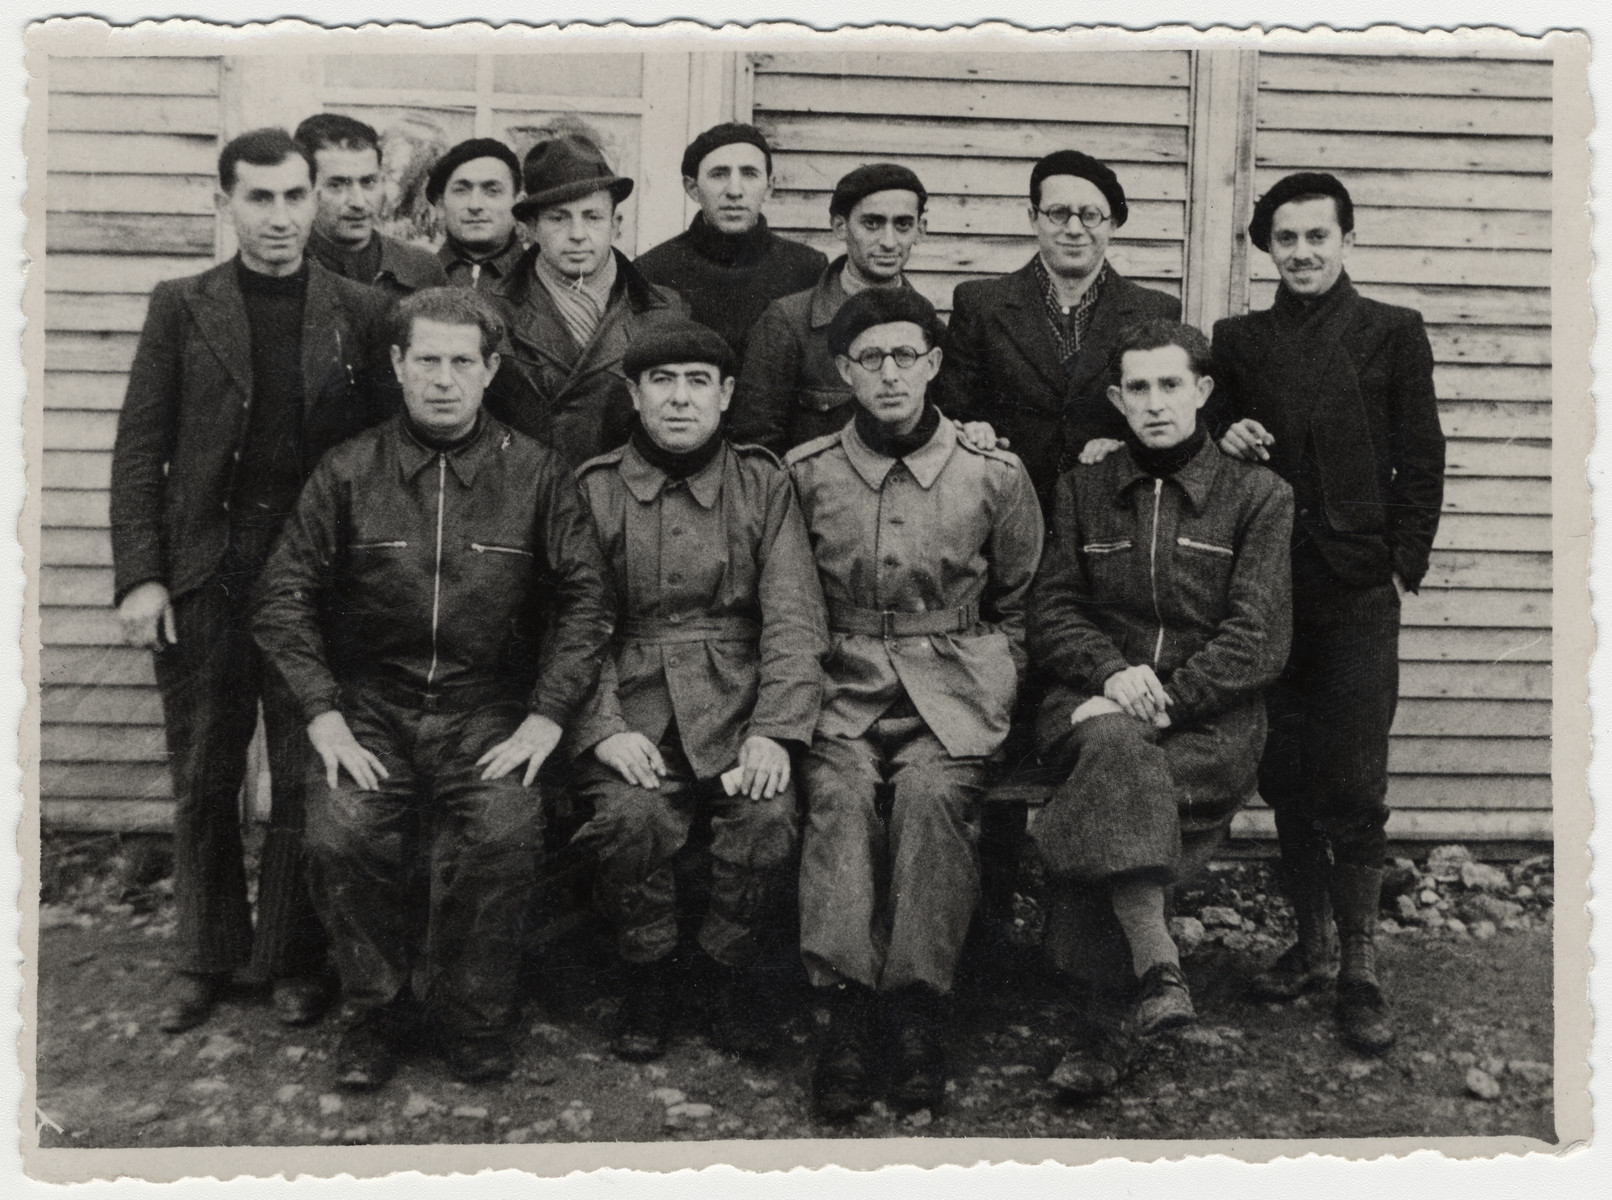 Group portrait of Jewish prisoners in the Beaune-la-Rolande internment camp.

Pictured seated is Itzrik Sztal (far left).  Standing are Moishe Sztal (far left), Chil Jankiel Sztal (second from left) and Jankiel Michalowicz (sixth from the left).